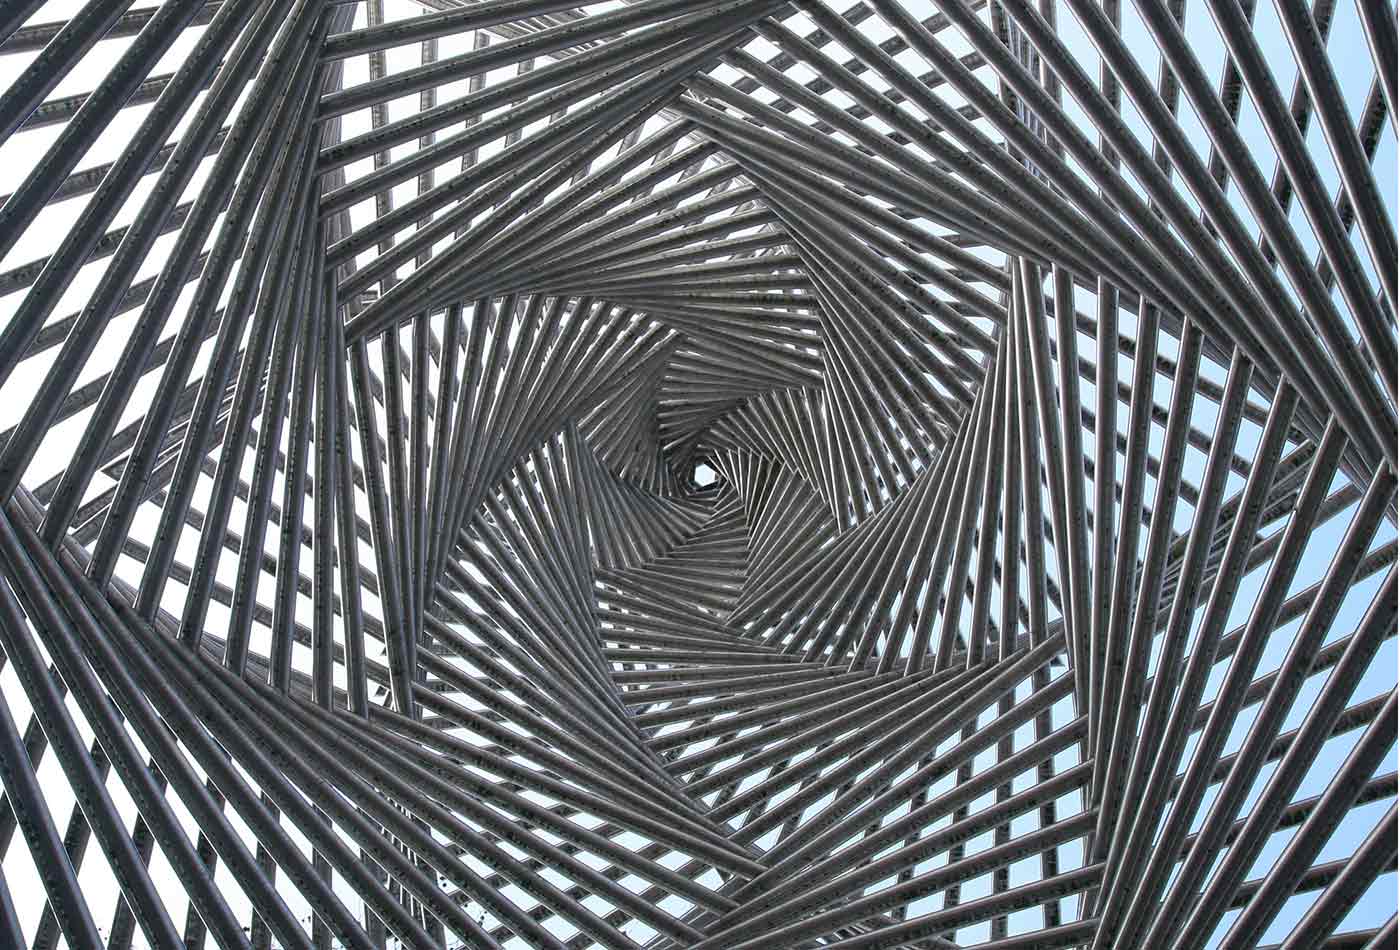 Sculpture at Platz der Synagoge as seen from the inside looking straight up. Göttingen, Germany.